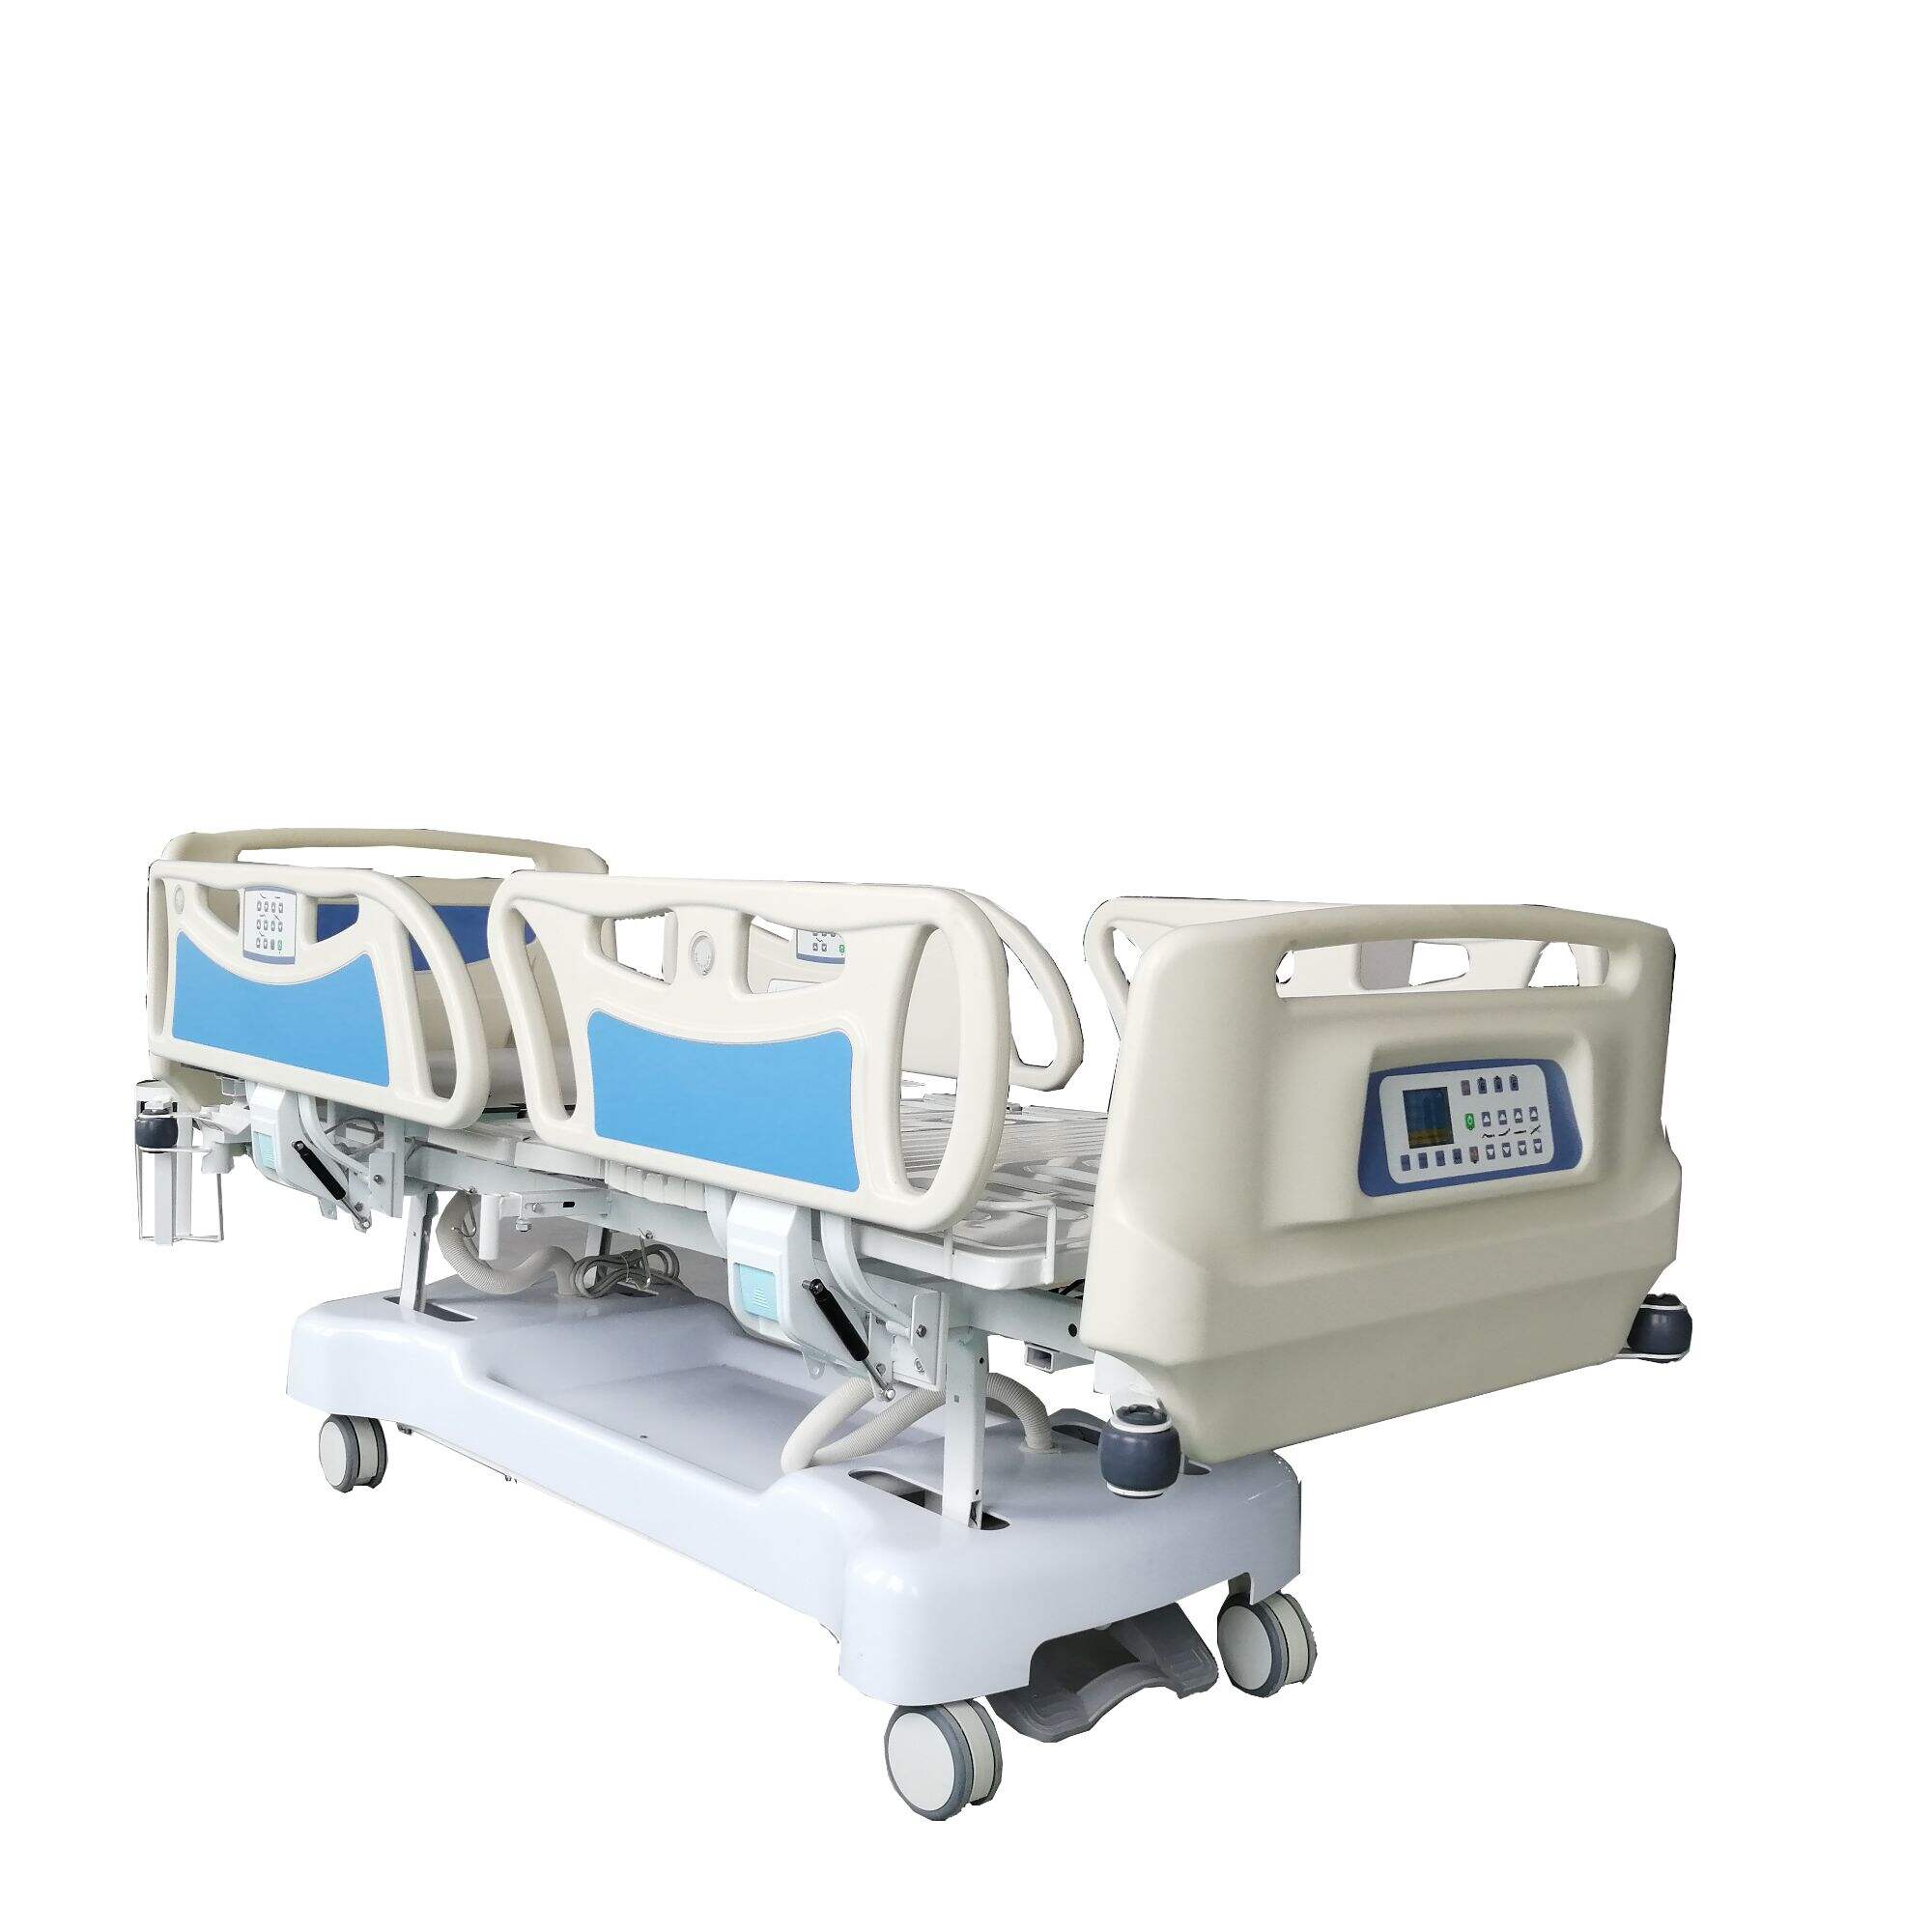 YFD5638K(II) Five Function Electric Hospital ICU Bed With Weighing Scale